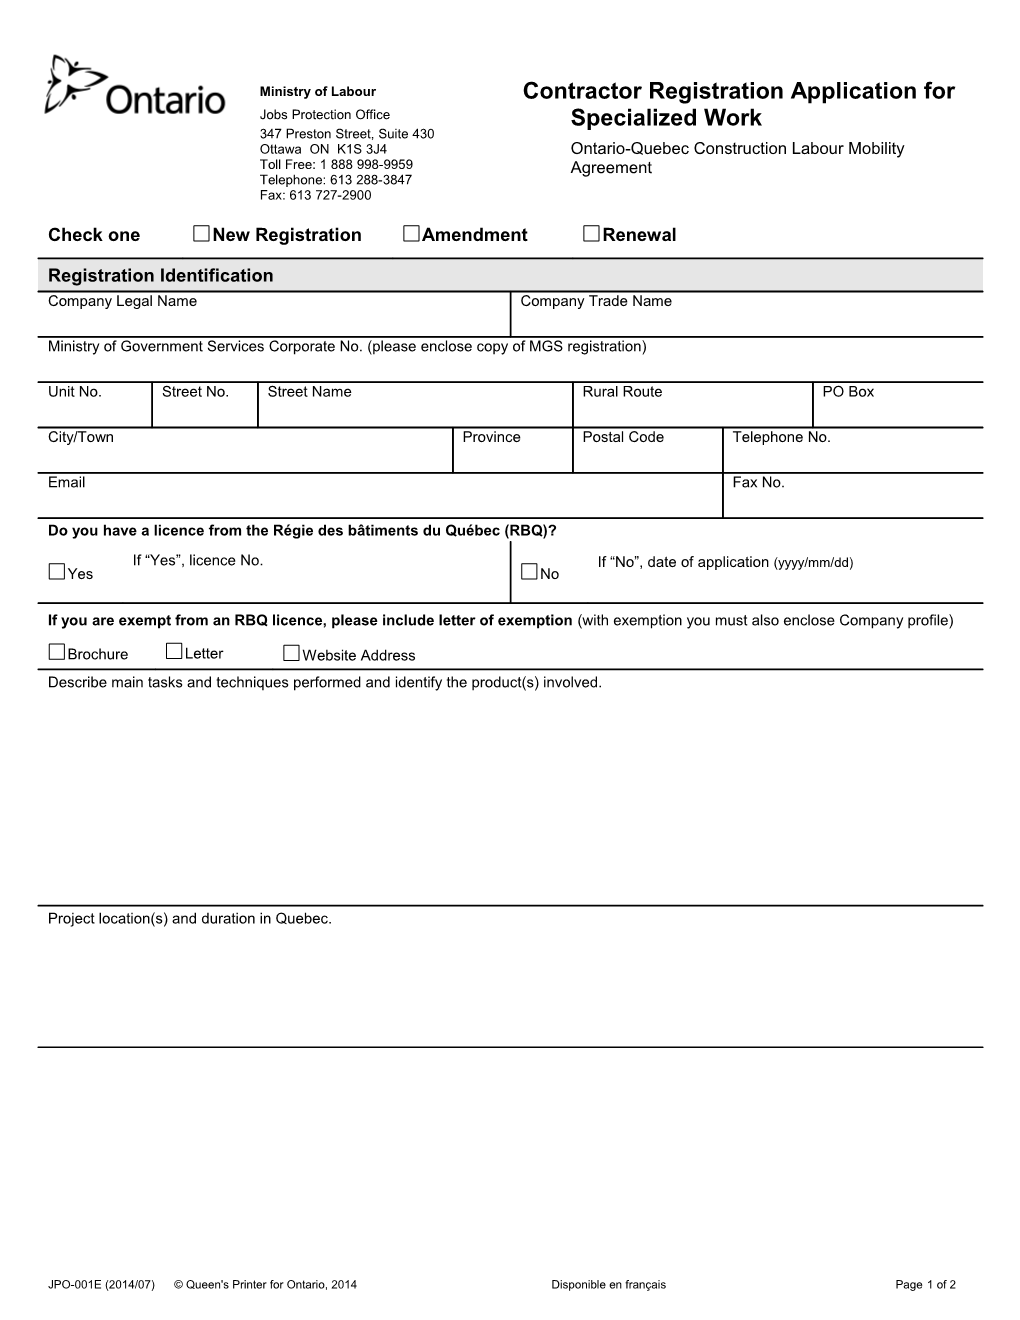 Contractor Registration Application for Specialized Workontario-Quebec Construction Labour